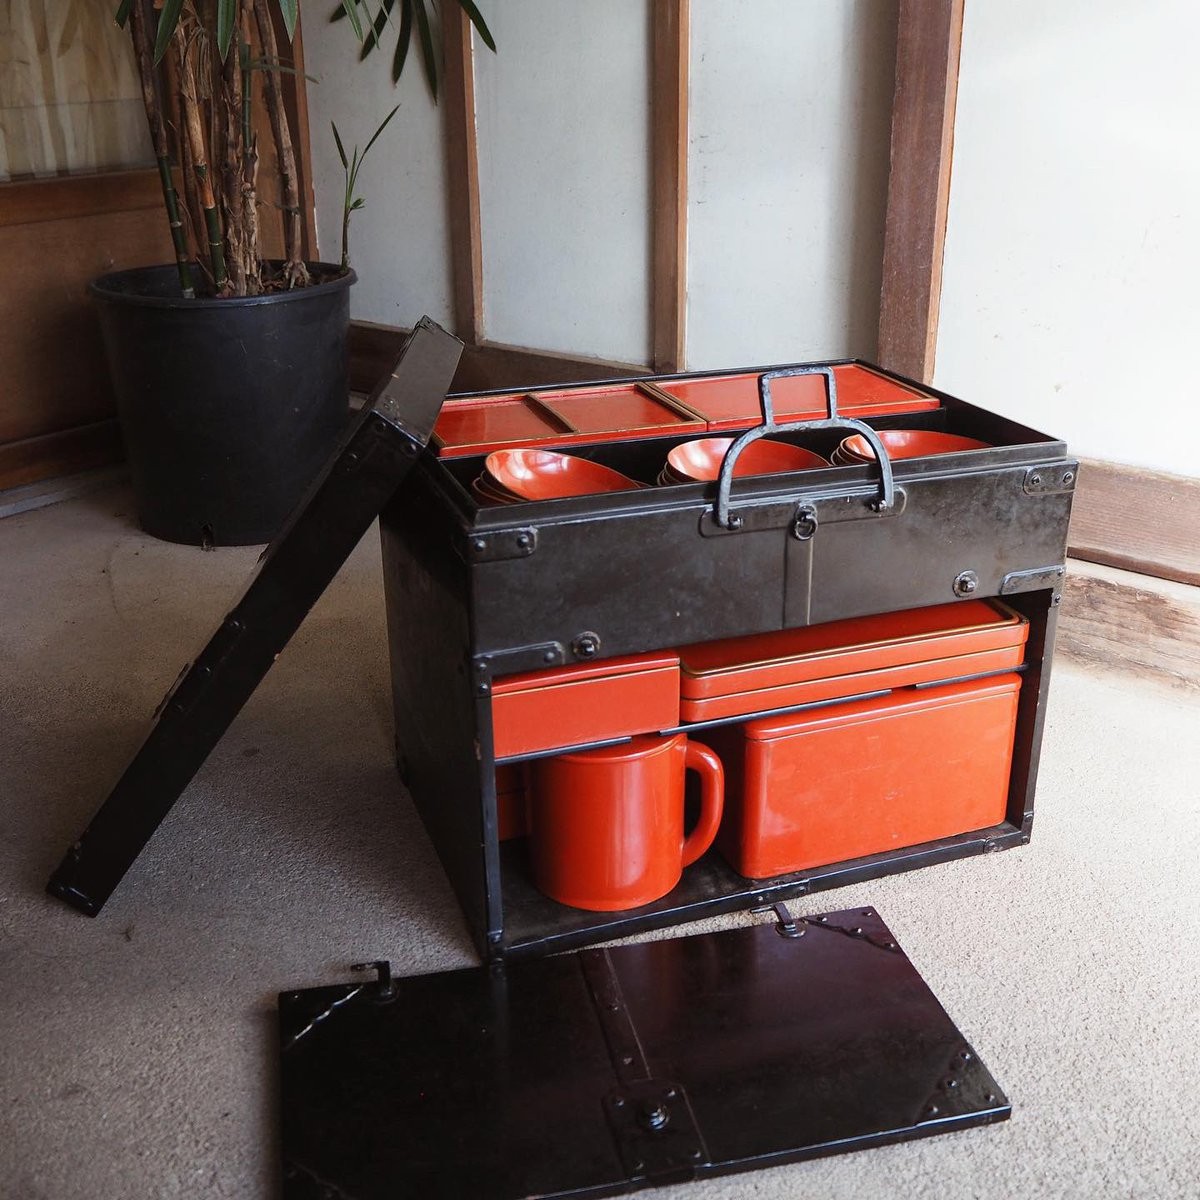 [Image] Click here for a picnic set from the Edo period that you got in antique city